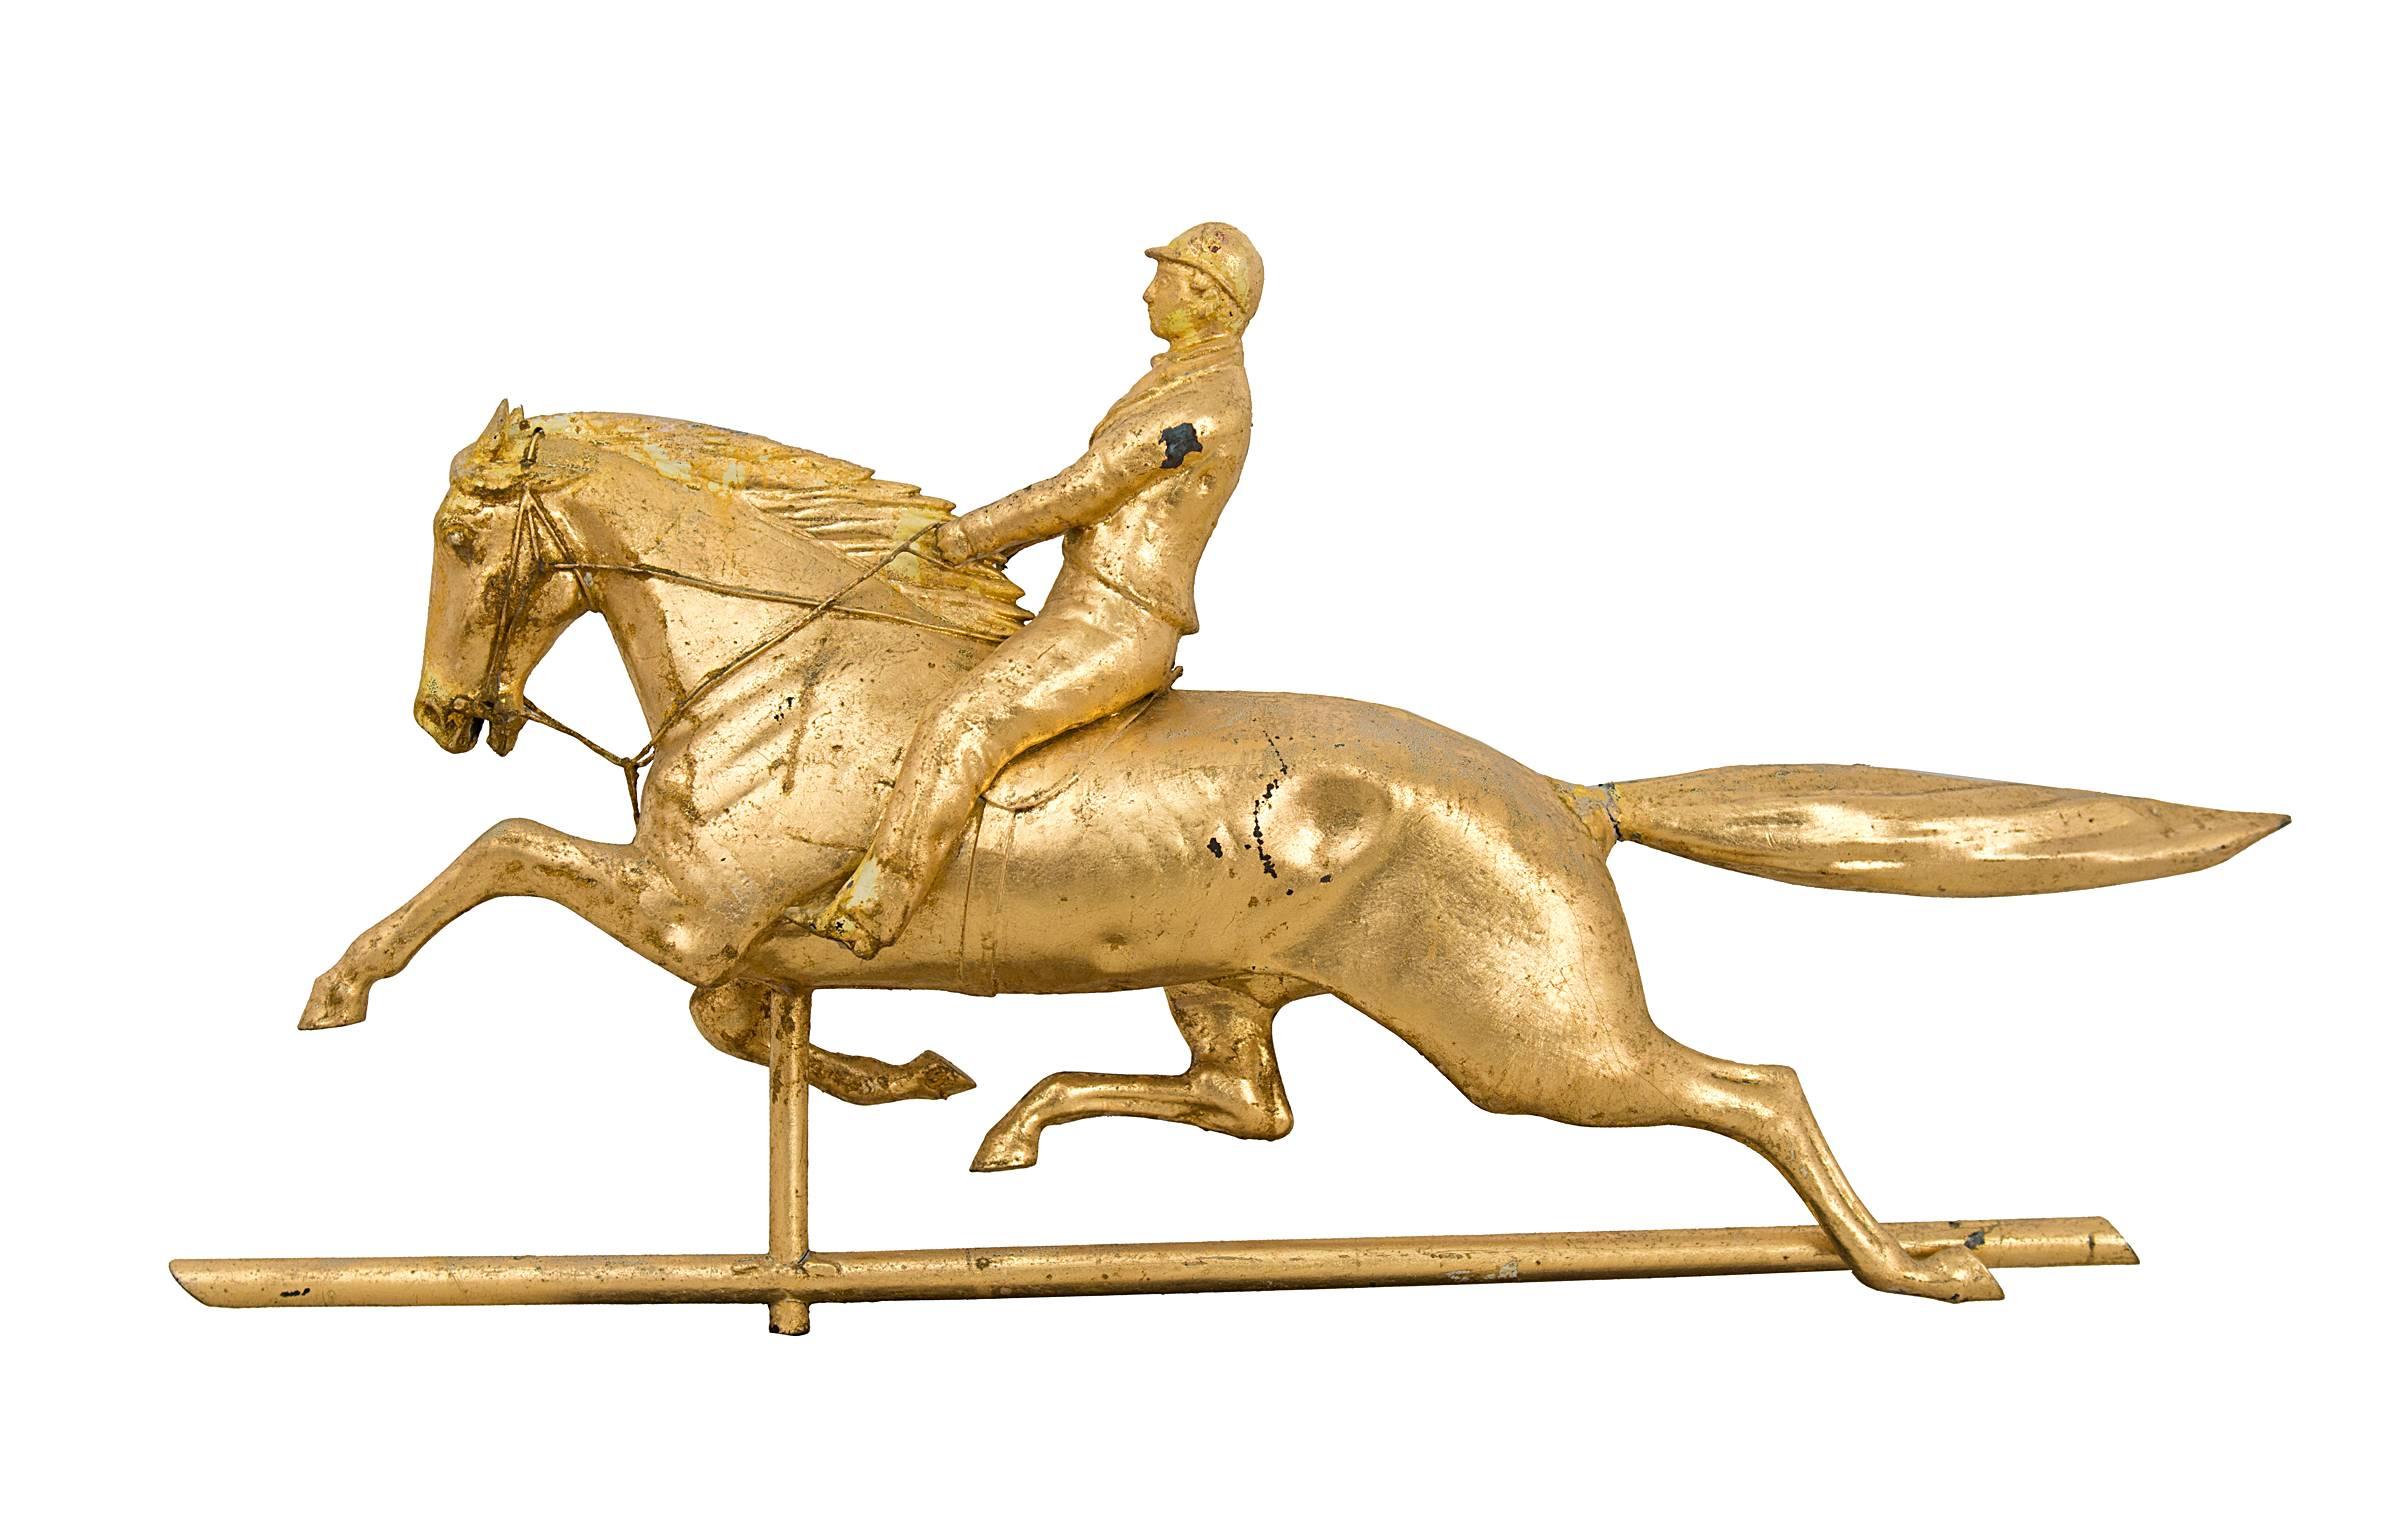 Fine horse and jockey weathervane. Molded copper and zinc. Retains an old re-gilded gold leaf surface. No structural restoration, minor crack where the tail meets the body. Attributed to Cushing and White, Waltham, Mass., circa 1875.
Complete with